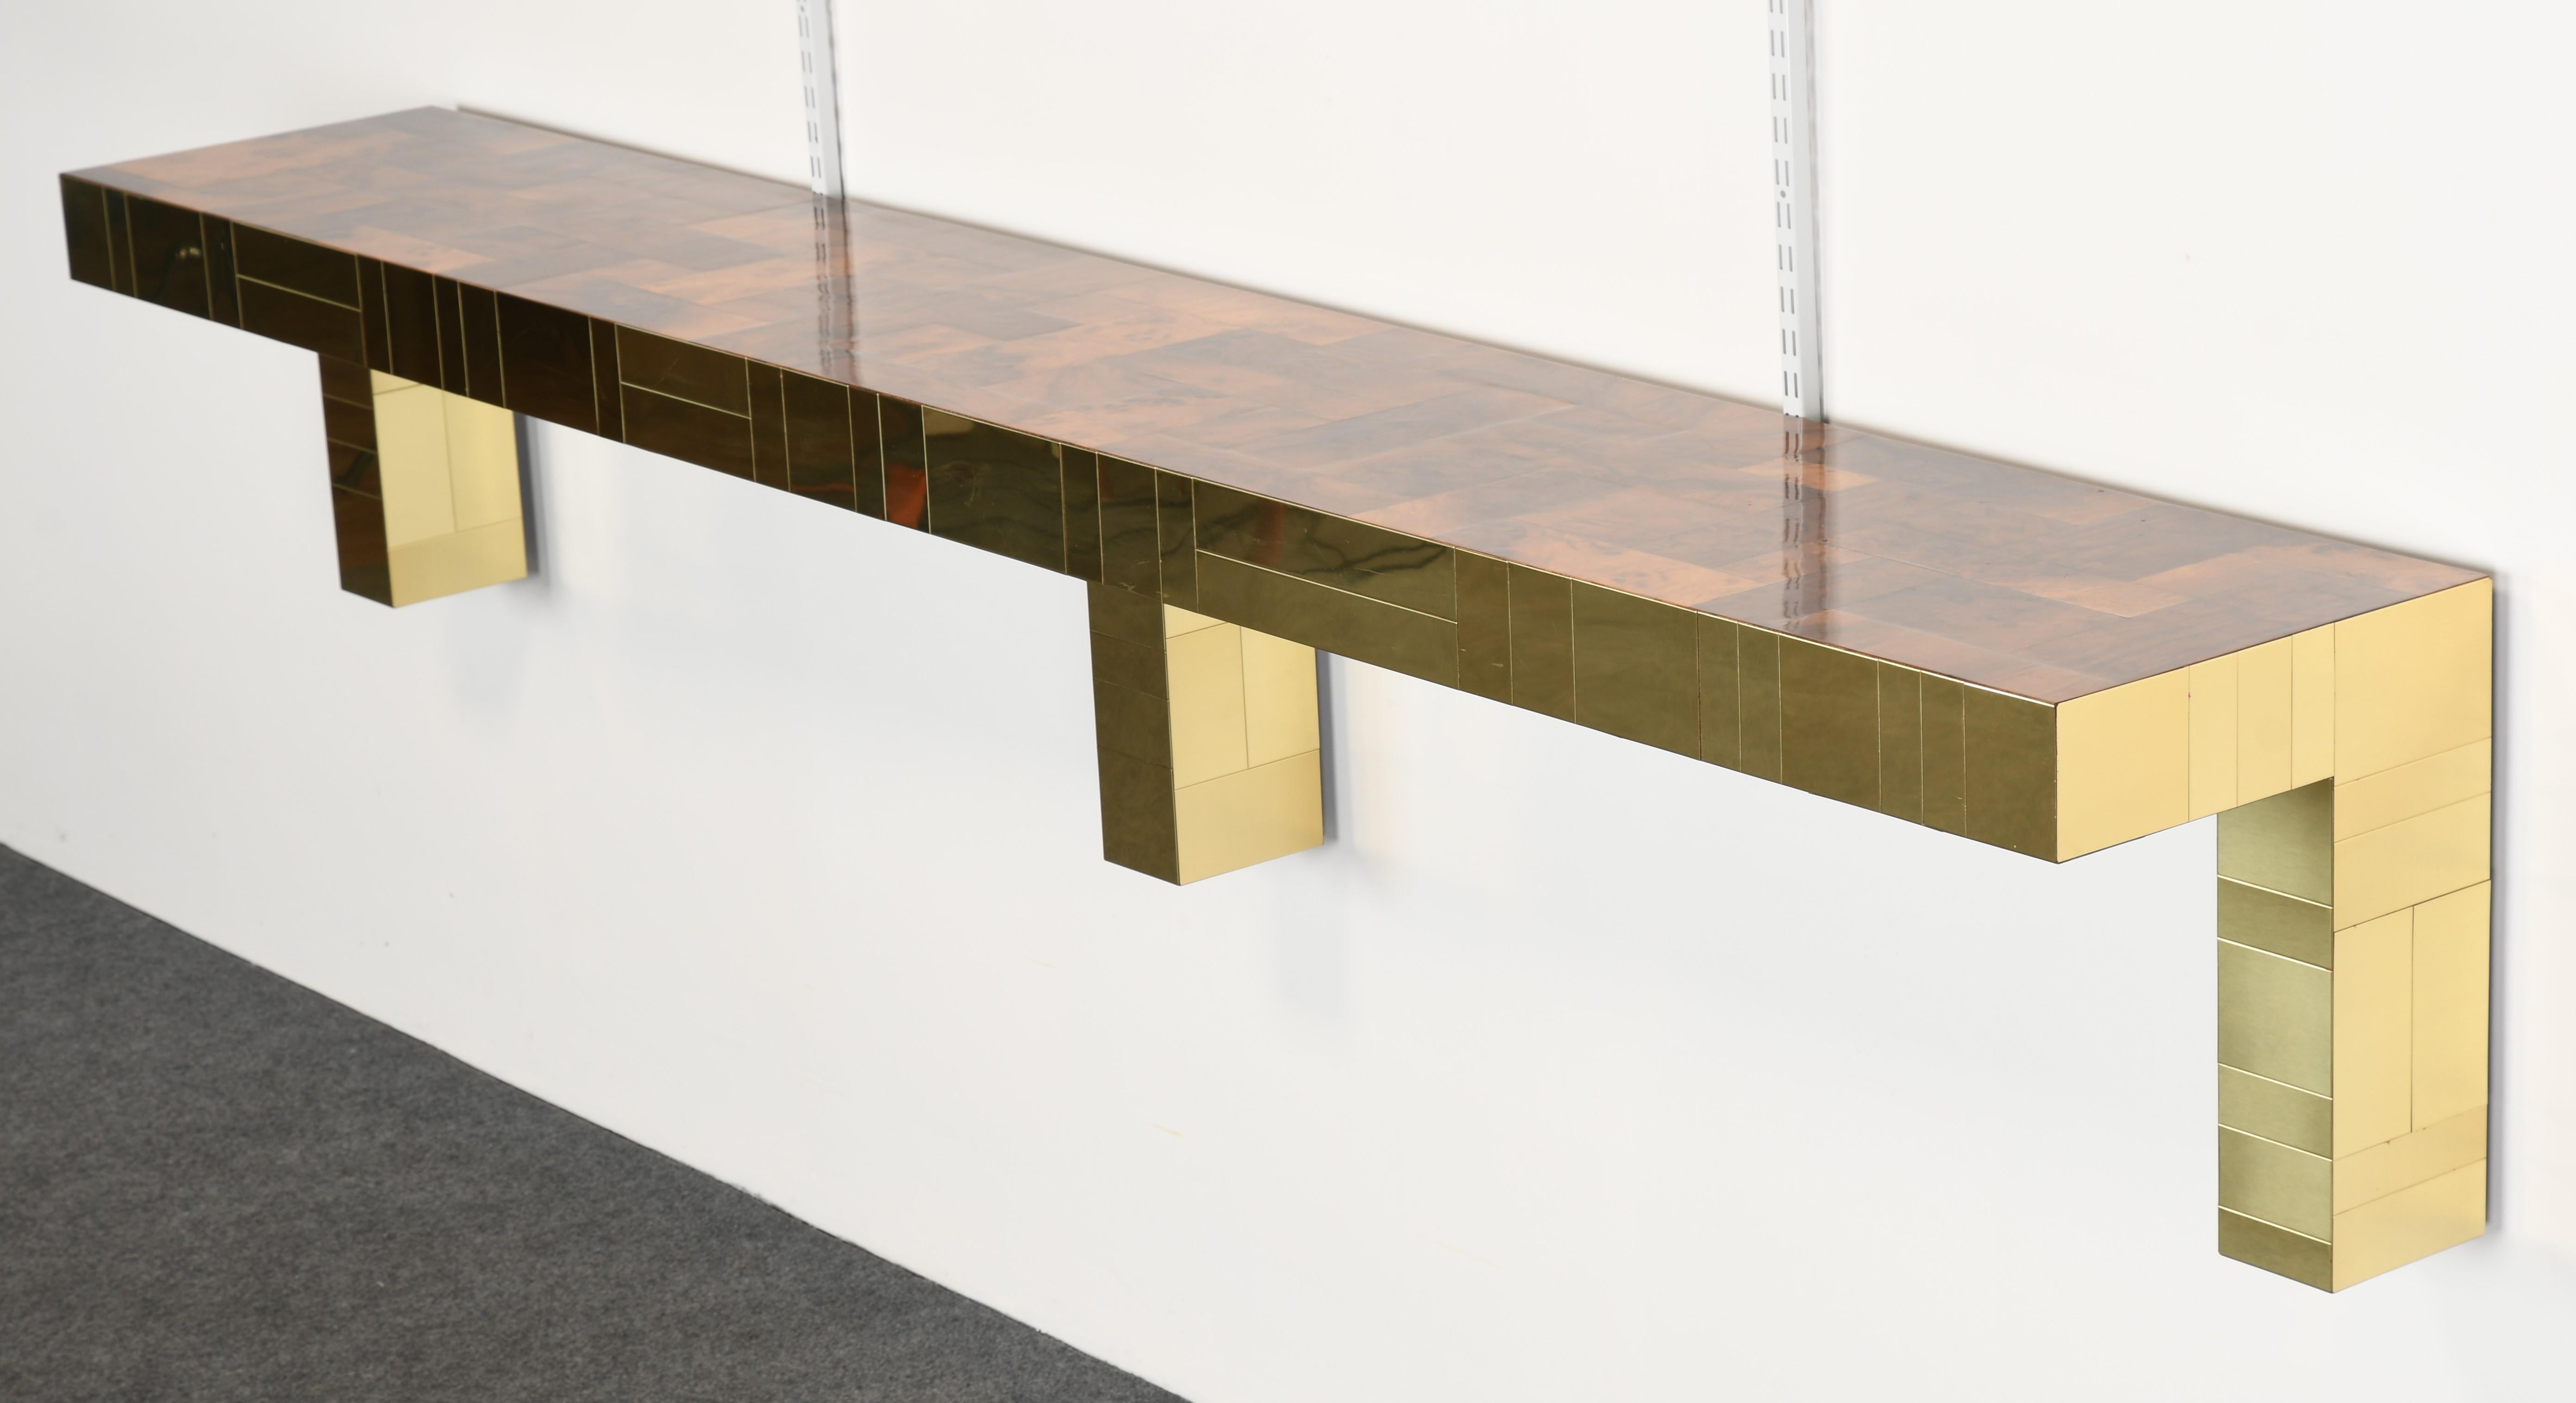 A Mid-Century Modern Paul Evans cityscape console table for Directional, USA. This very large monumental console table is stunning with a brass base and walnut burl top. Signed underside. The table is in very good condition.

Dimensions: 18.13